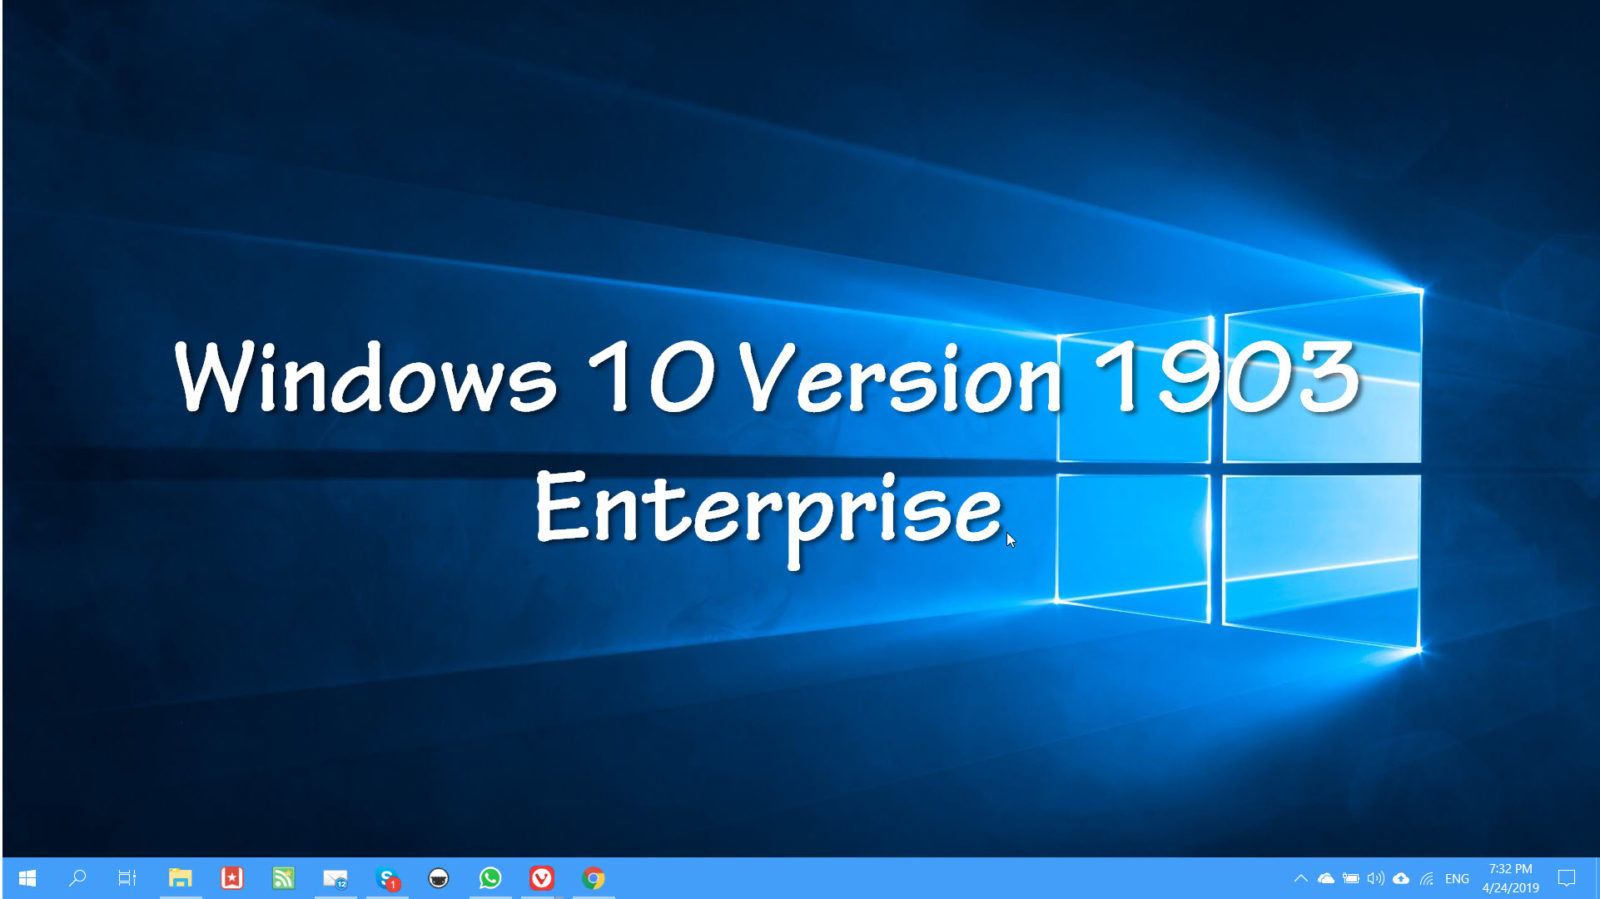 windows 10 1903 download iso 64 bit with crack full version